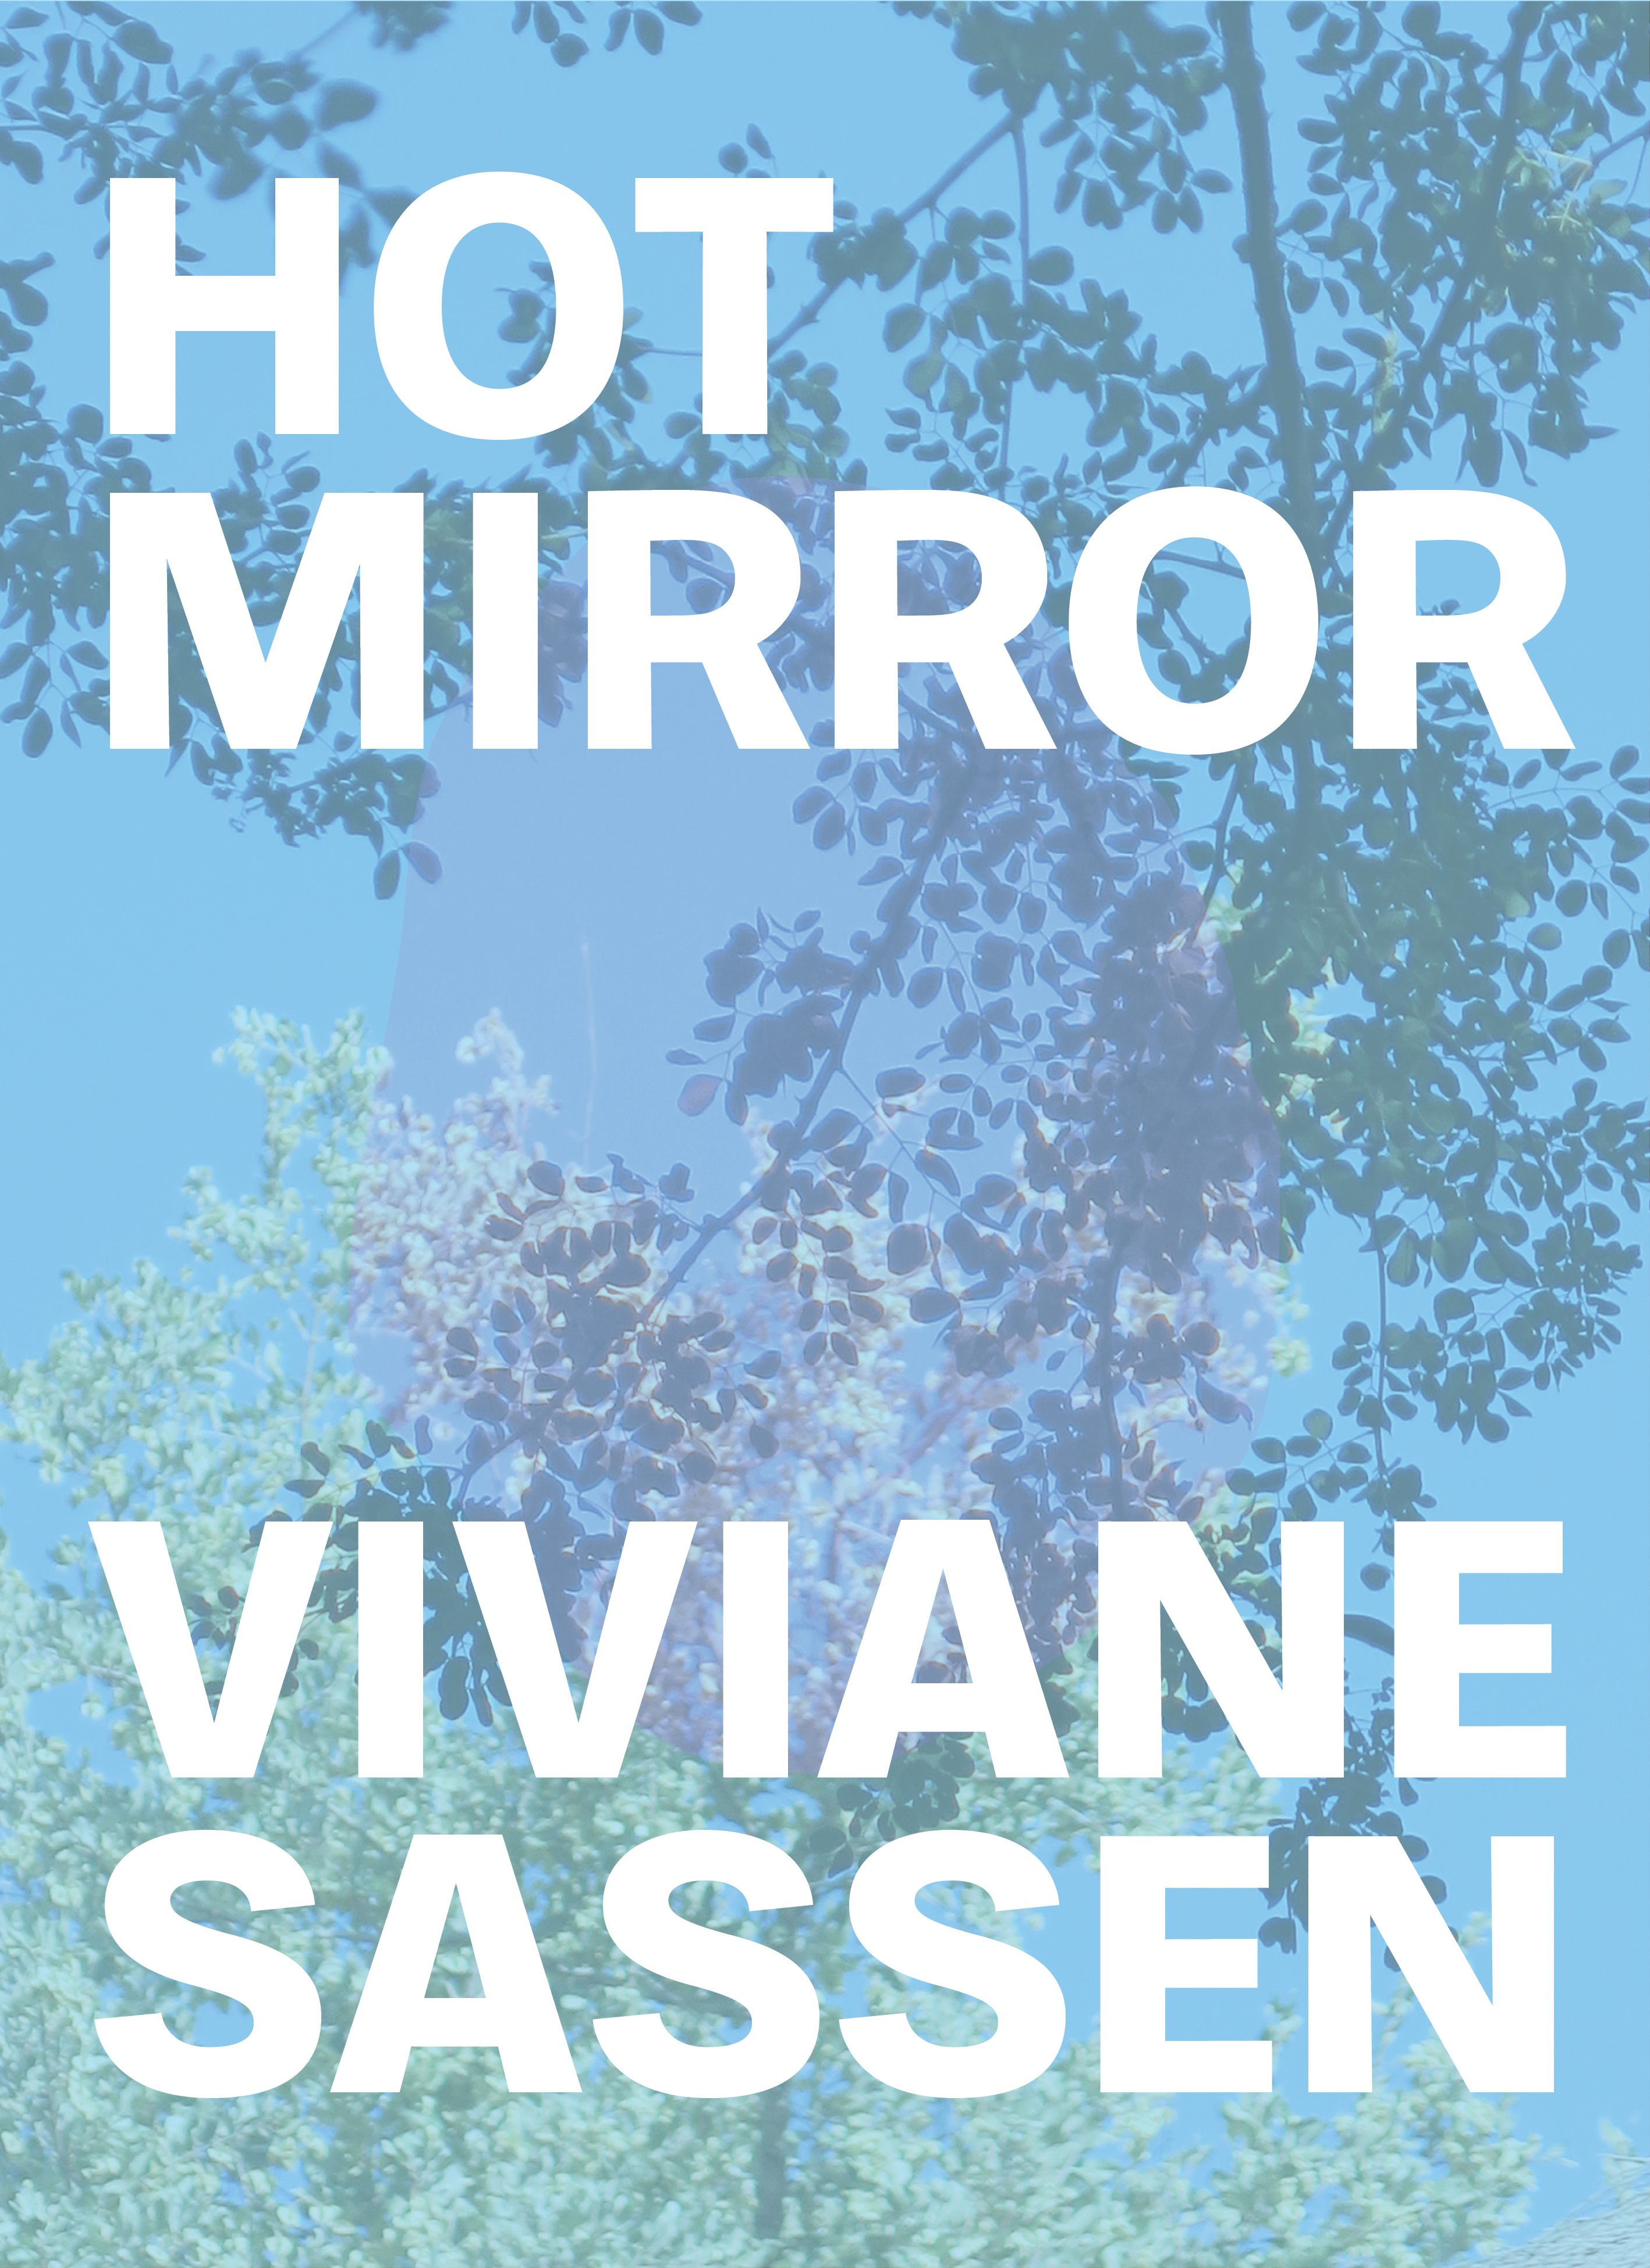 In and Out of Fashion - Signed by Sassen to curator by Viviane